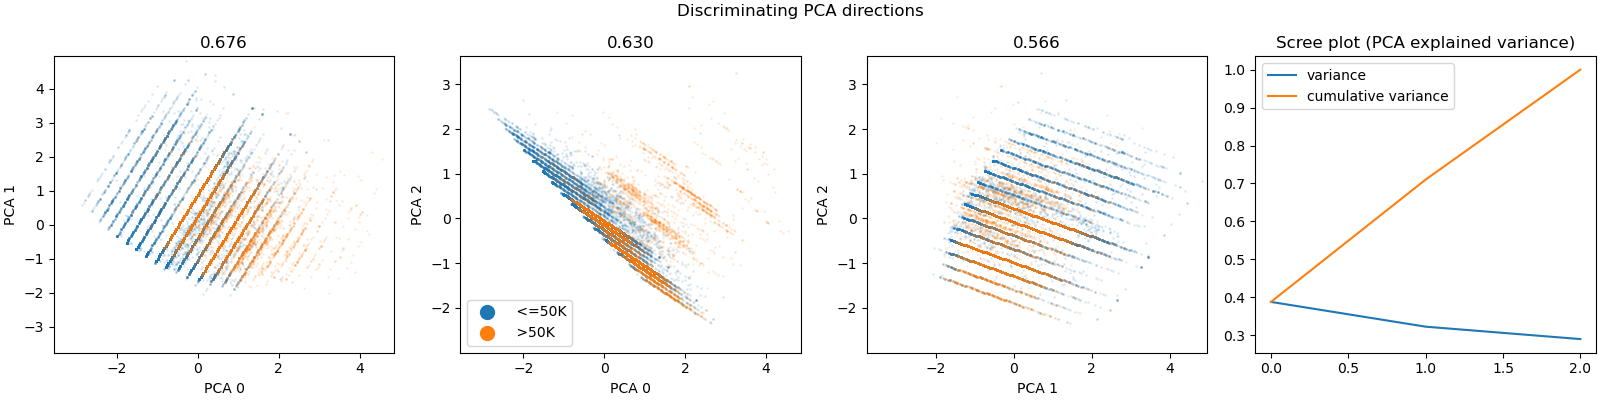 Discriminating PCA directions, 0.676, 0.630, 0.566, Scree plot (PCA explained variance)